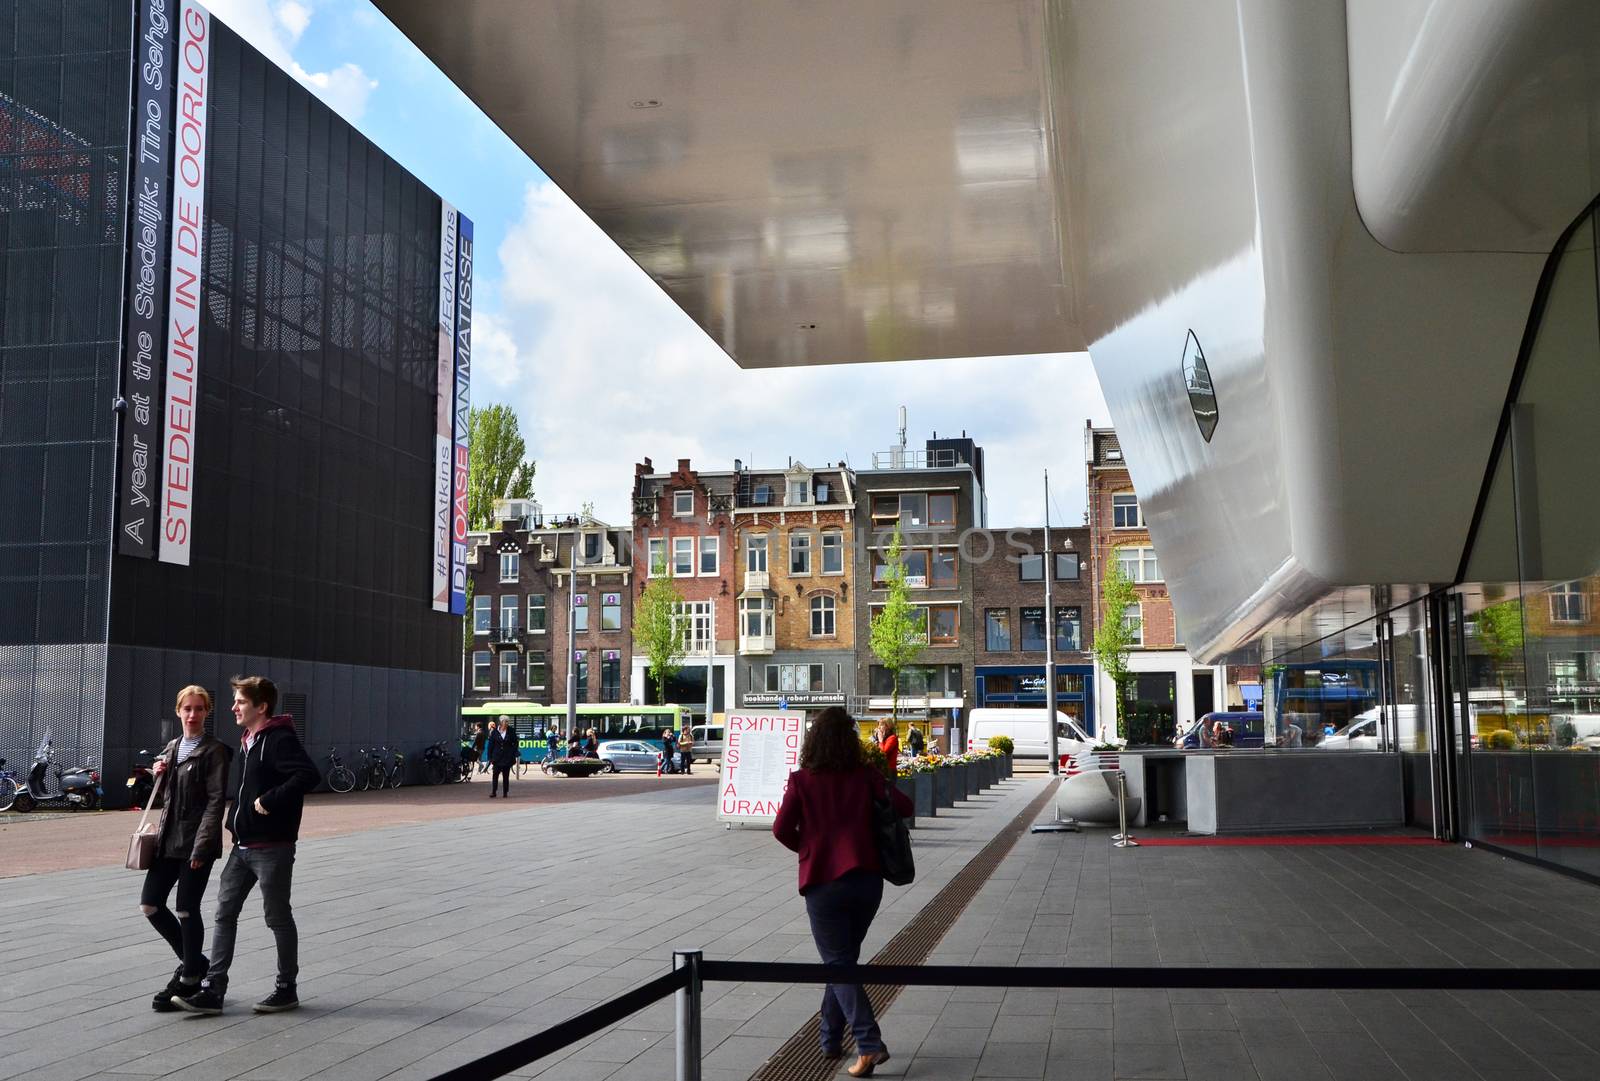 Amsterdam, Netherlands - May 6, 2015: People visit famous Stedelijk Museum in Amsterdam located in the museum park, Netherlands on May 6, 2015